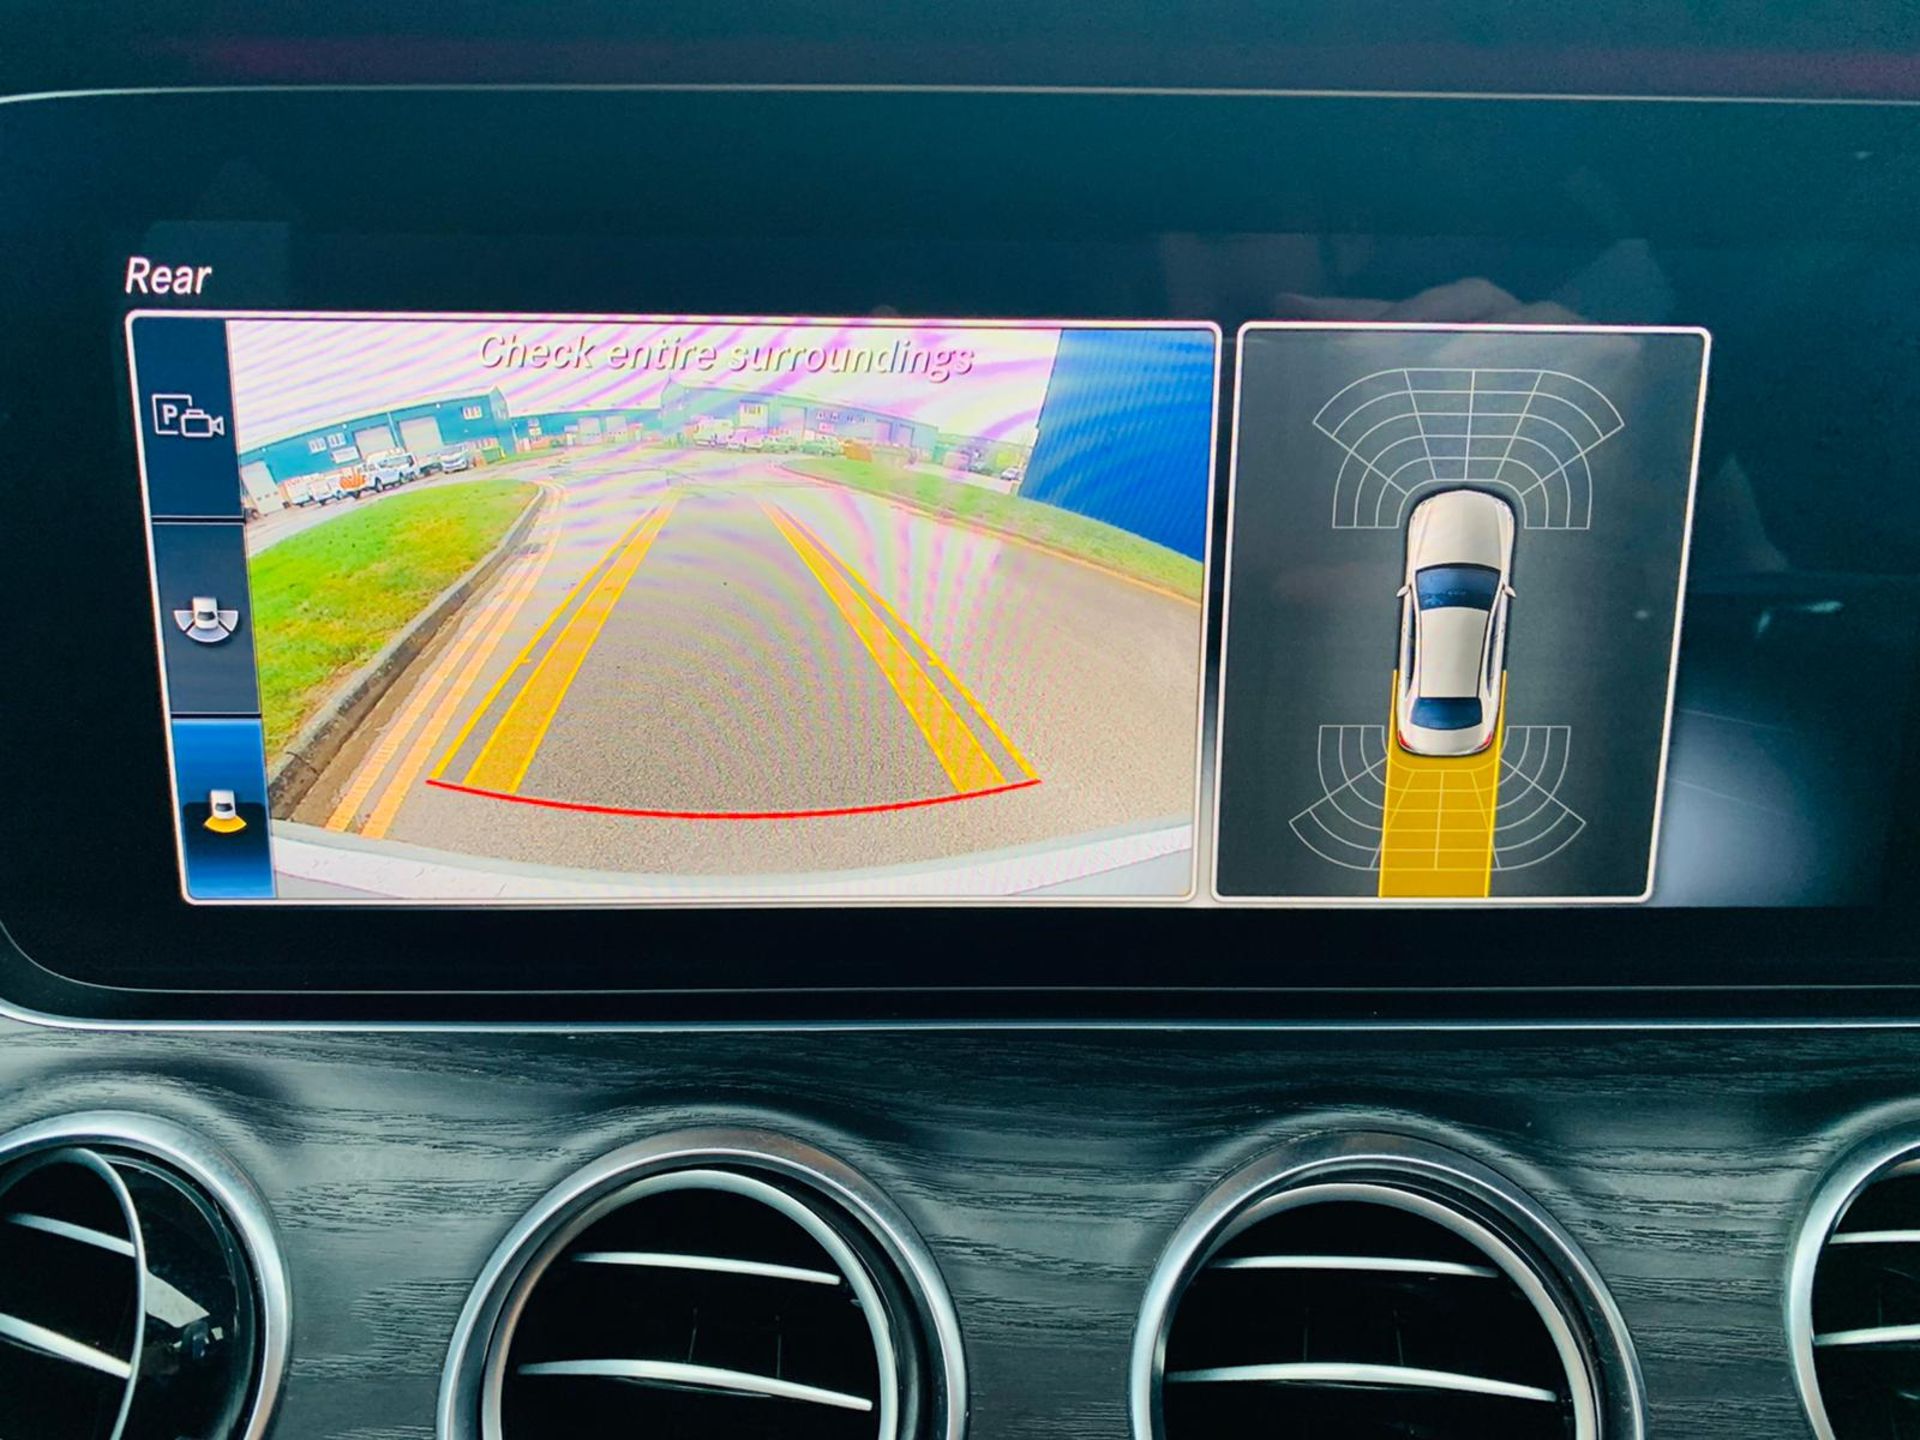 (RESERVE MET) Mercedes E220d AMG Line Auto 9G Tronic - 2019 Reg - Reversing Cam - 1 Owner From New - Image 22 of 30